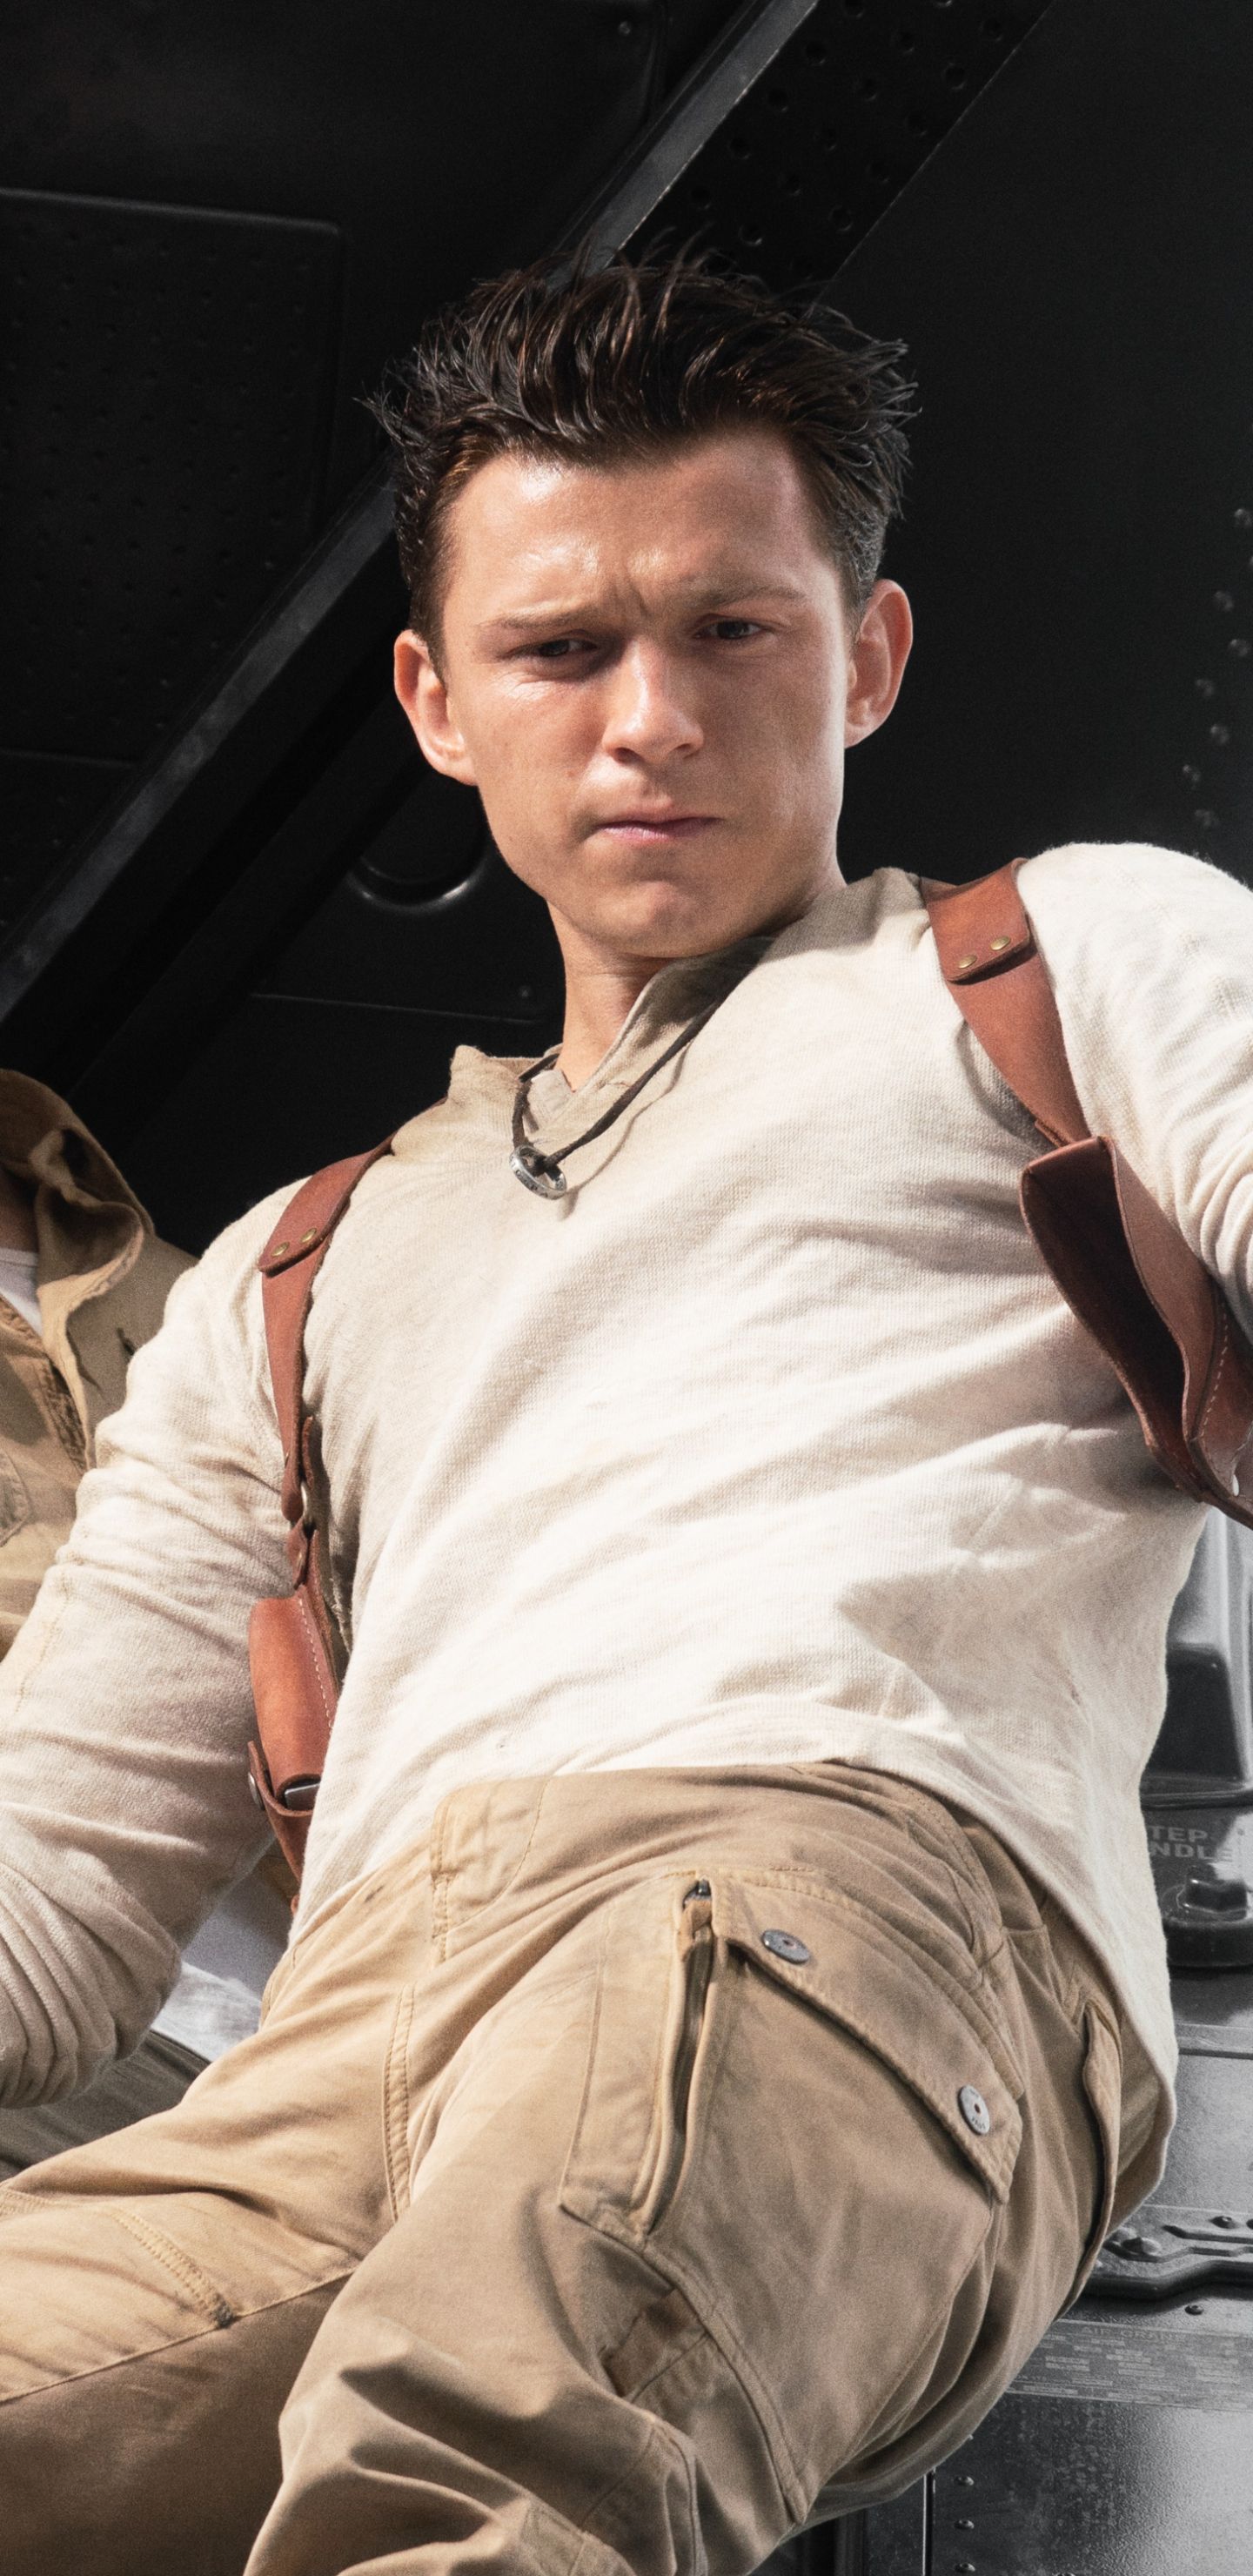 Mobile wallpaper: Uncharted, Movie, Nathan Drake, Tom Holland, 1191365 download the picture for free